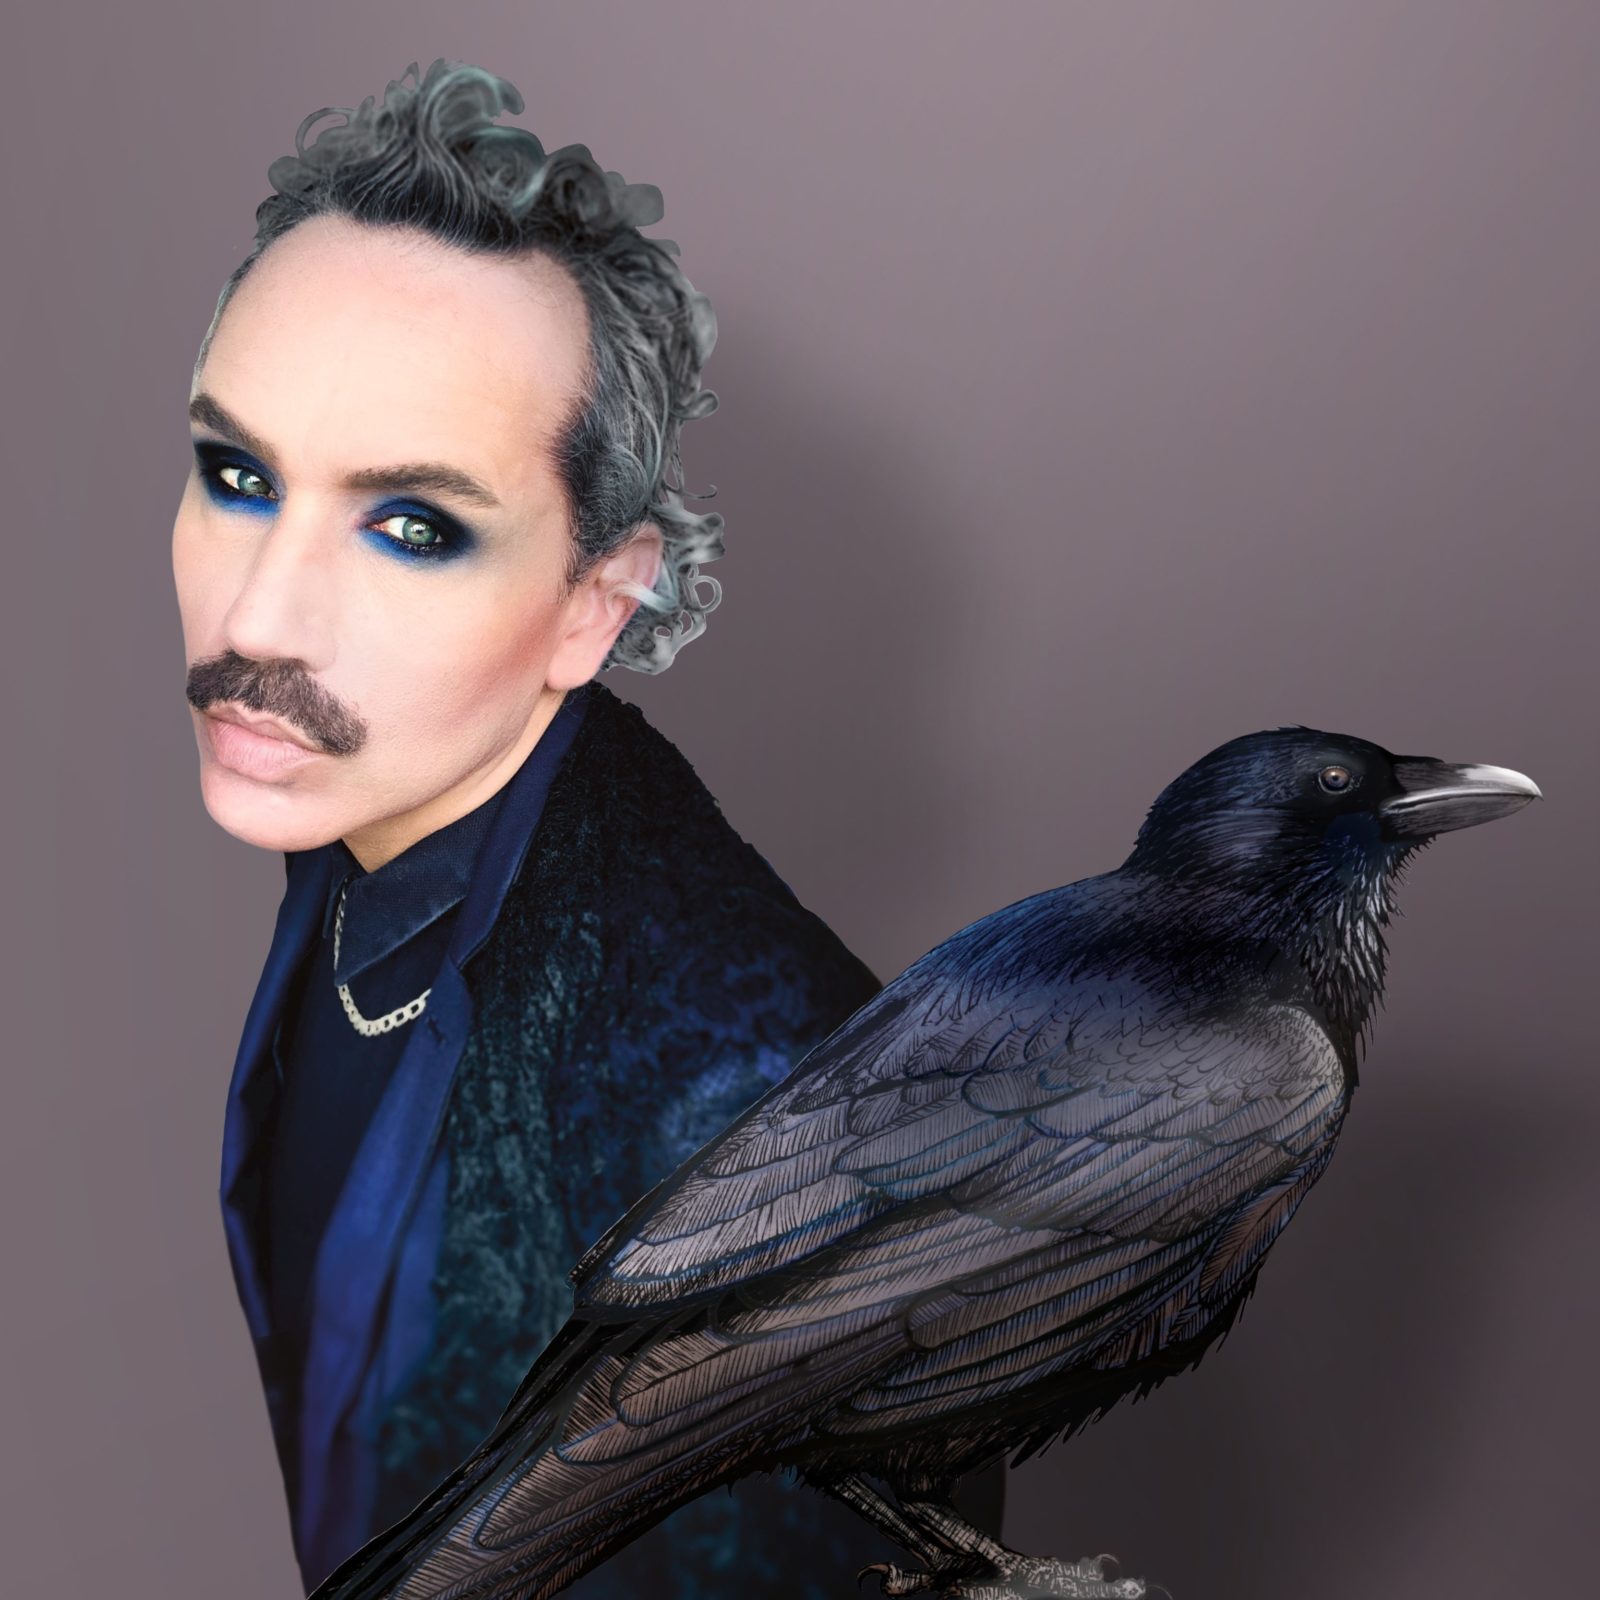 Paul Harfleet is dressed as a Raven, his hair is tightly curled back and he wears black eyeshadow with electric blue accents. He is wearing a dark blue/green suit jacket and a black shirt. A detailed illustration on a Raven is in front of him.